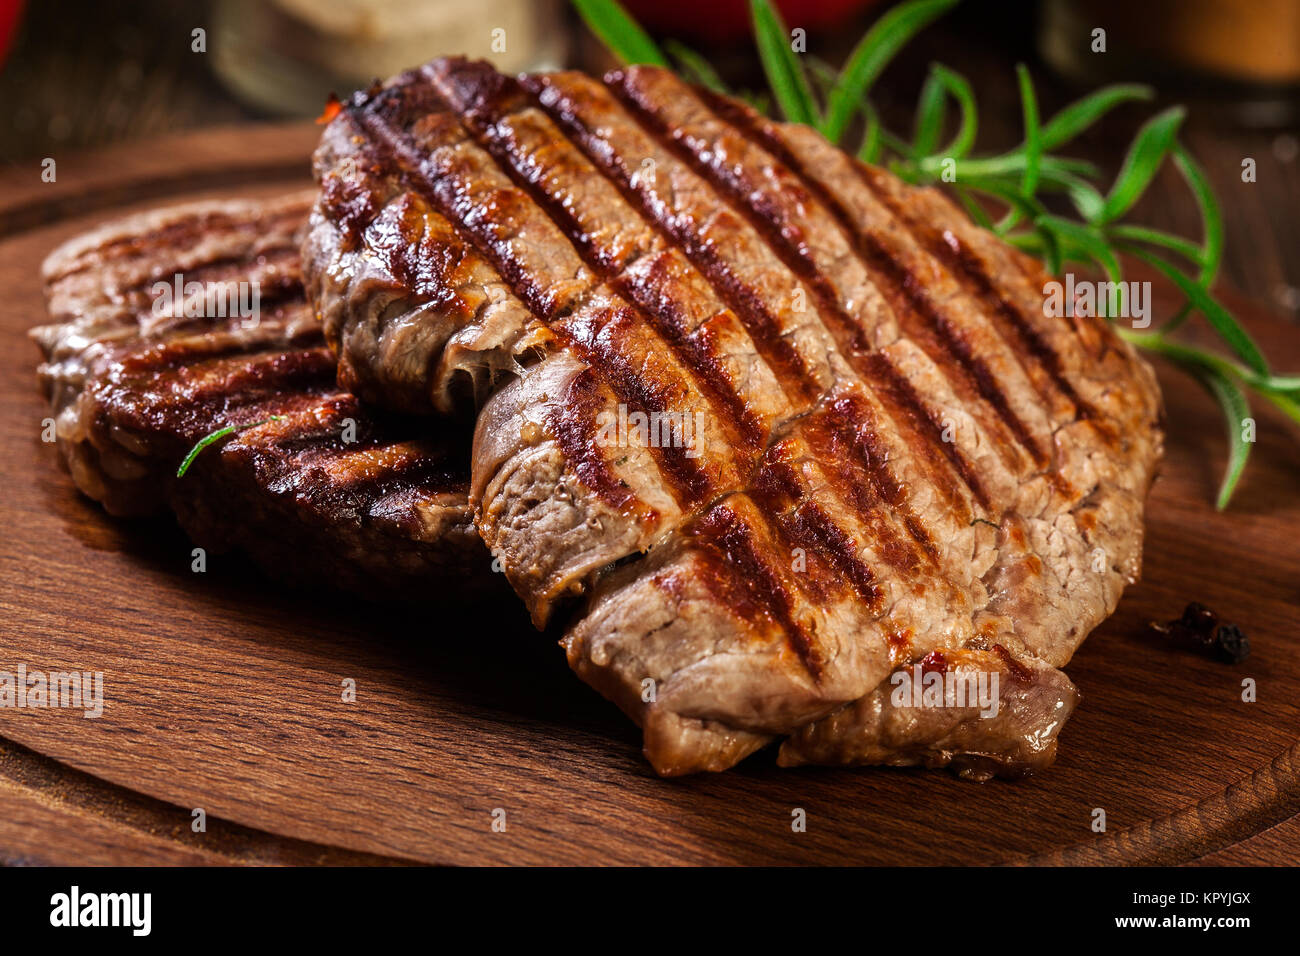 Succulent portions of grilled fillet mignon served with rosemary on an wooden board Stock Photo